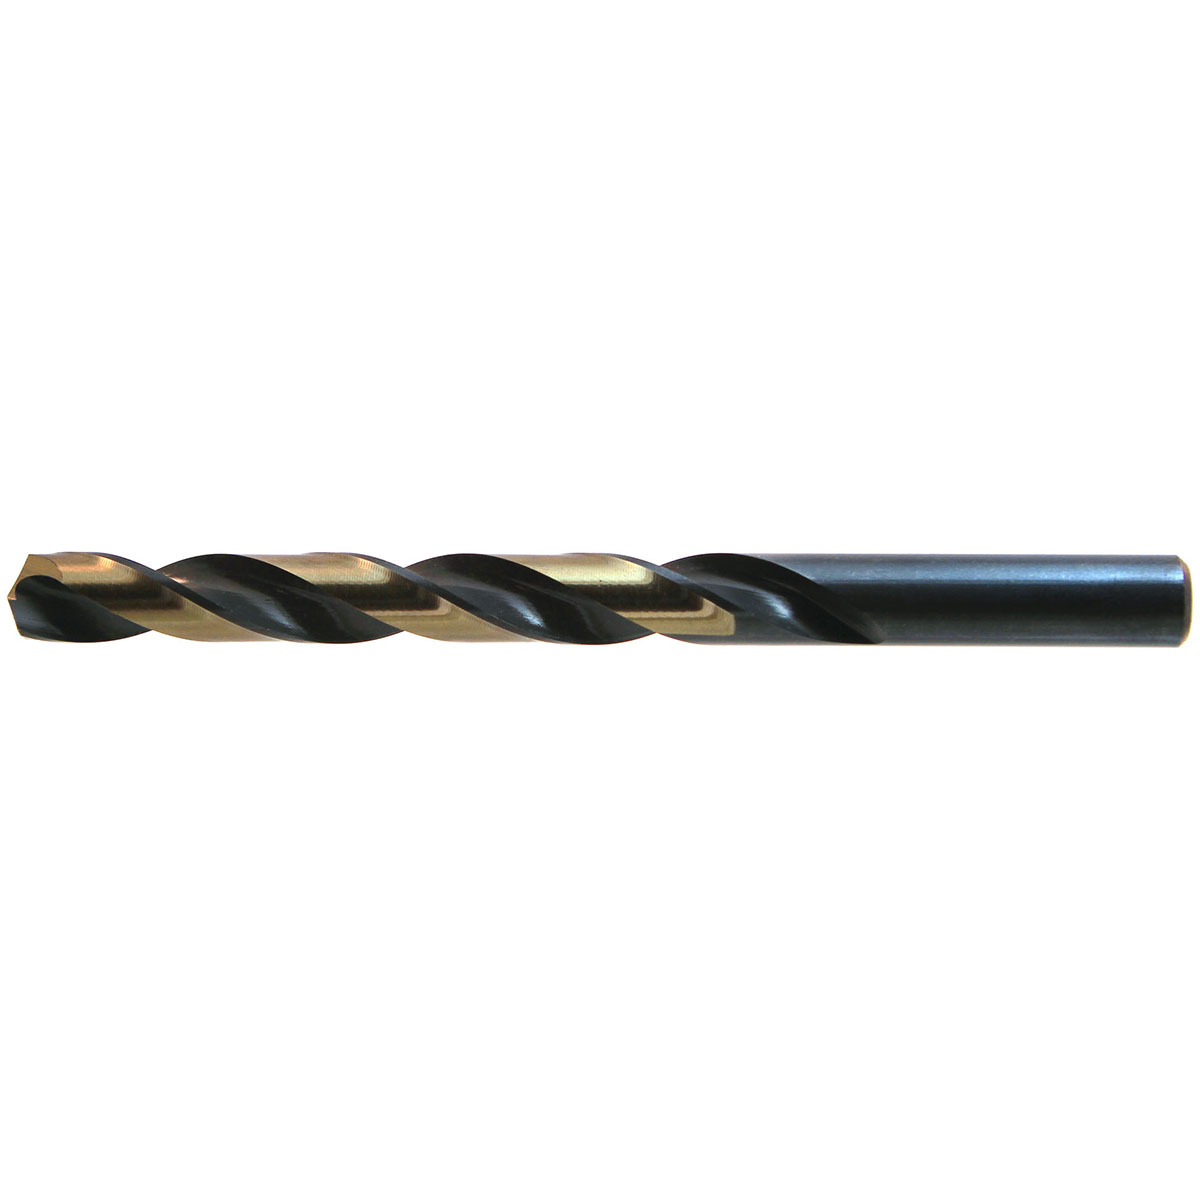 Drillco Series 1000E 5/8 X 6 Bright and Black HSS General Purpose S&D Drill Bit with 1/2 Flat Reduced Shank and 3 Spiral Flute 3 Units 